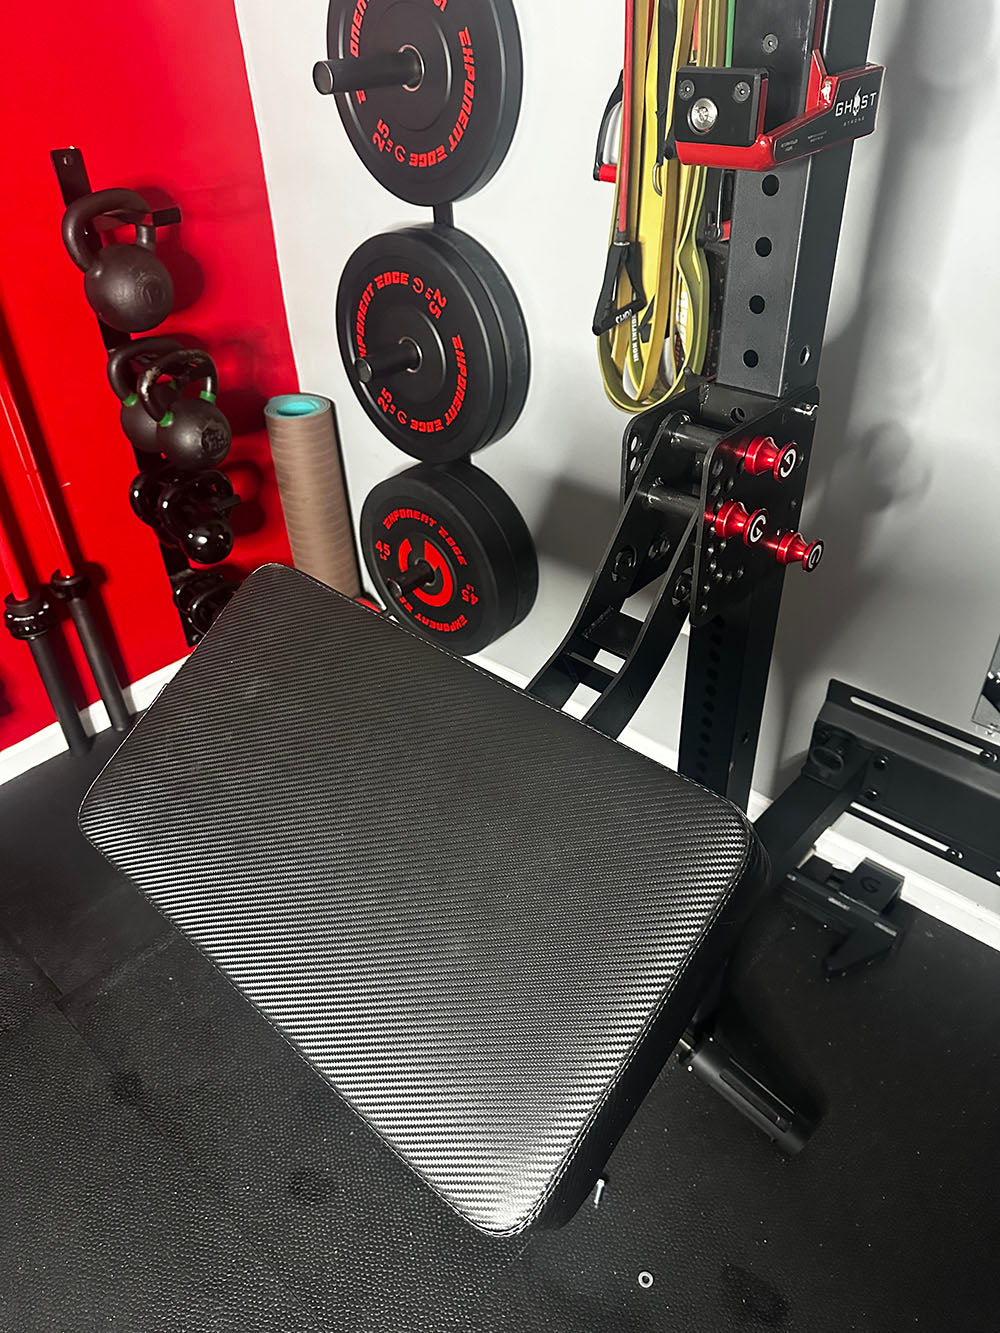 The rack-attaching, Infinity Arm can be utilized for chest-supported, arm-supported, back-supported, head-supported, and many other supported exercises. This image presents the Infinity Large Pad Attachment attached to a power rack from a front view.